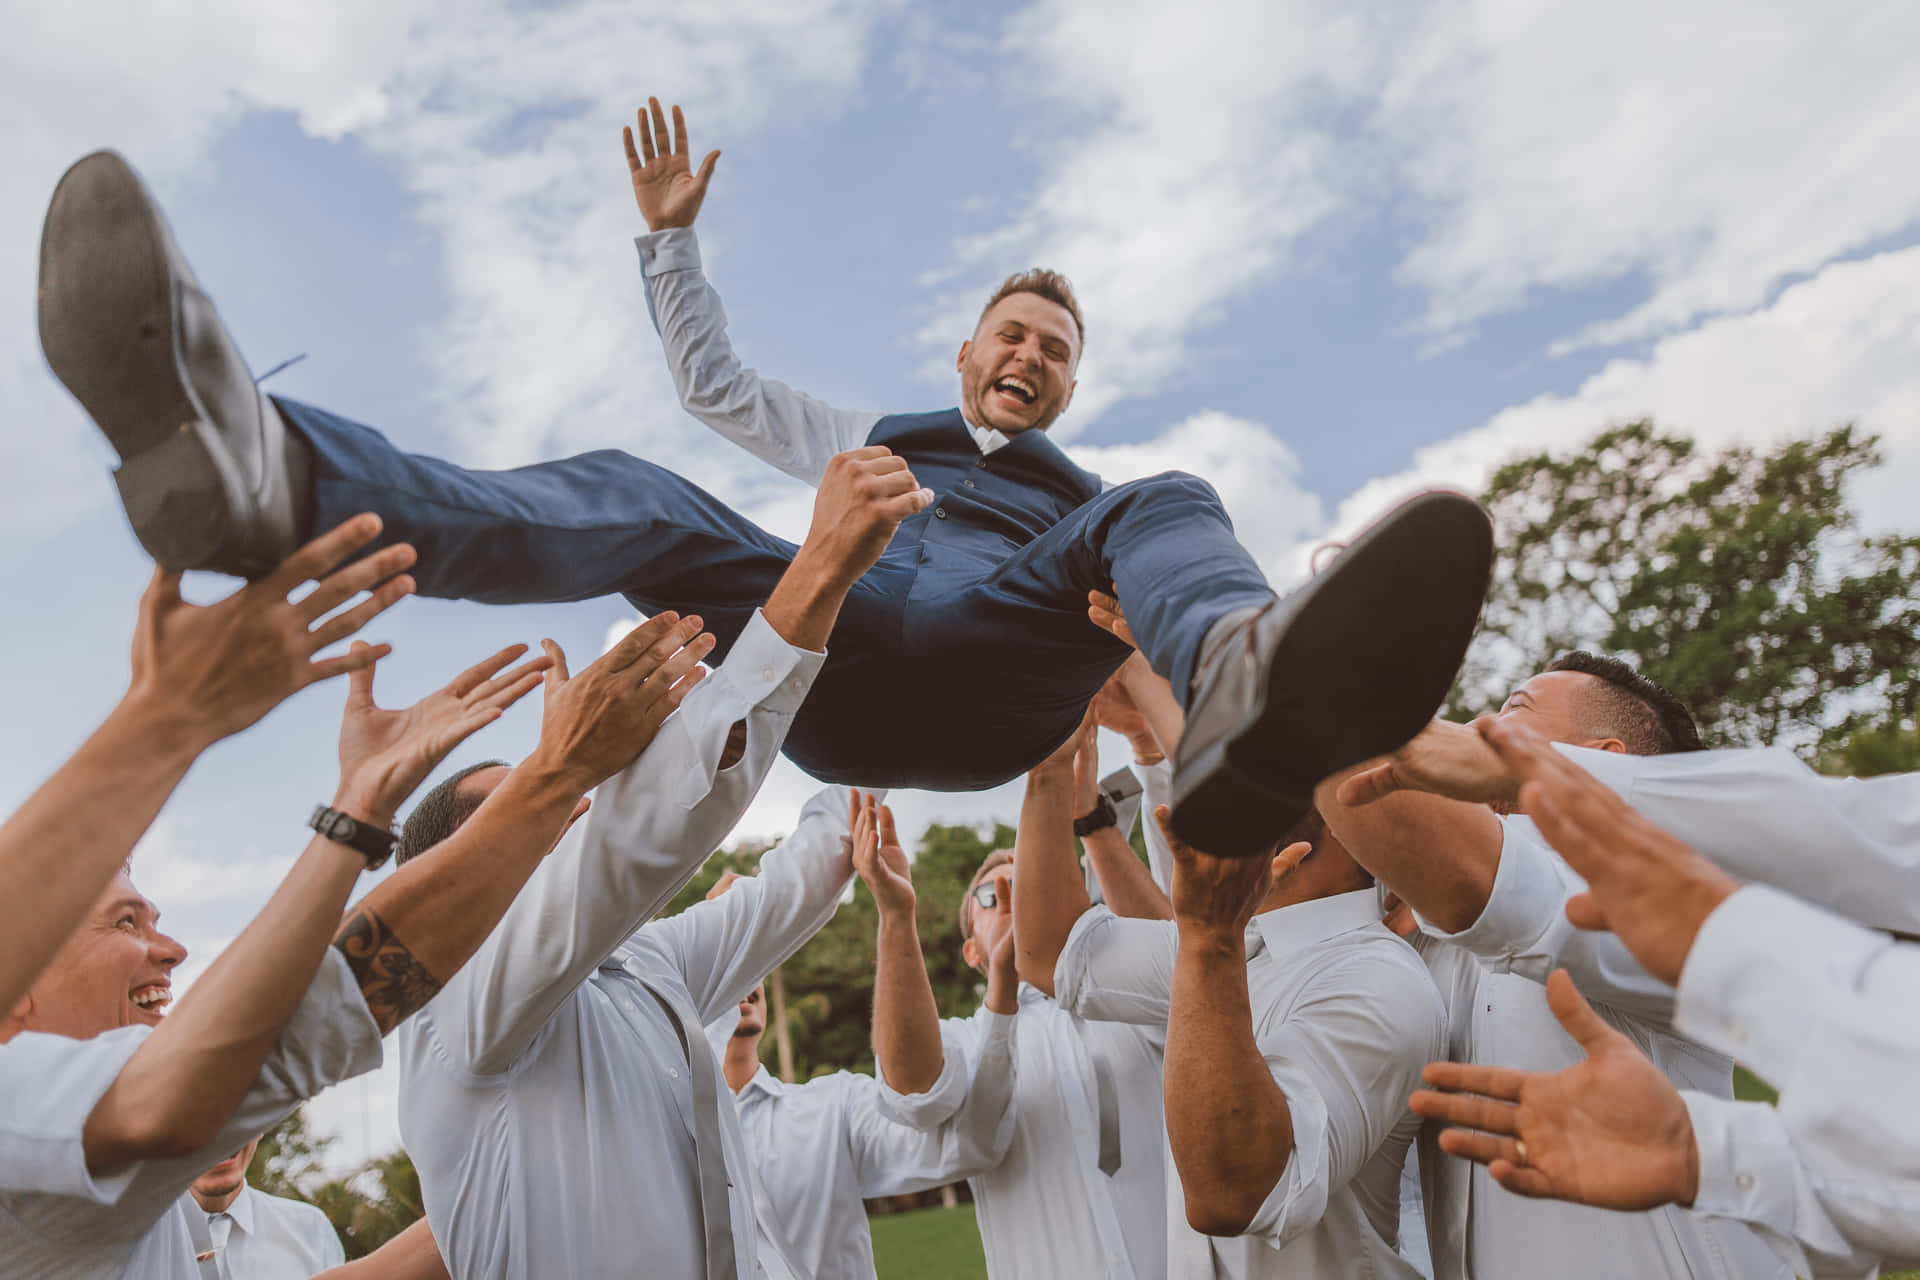 A Group of Groomsmen Celebrating at a Wedding